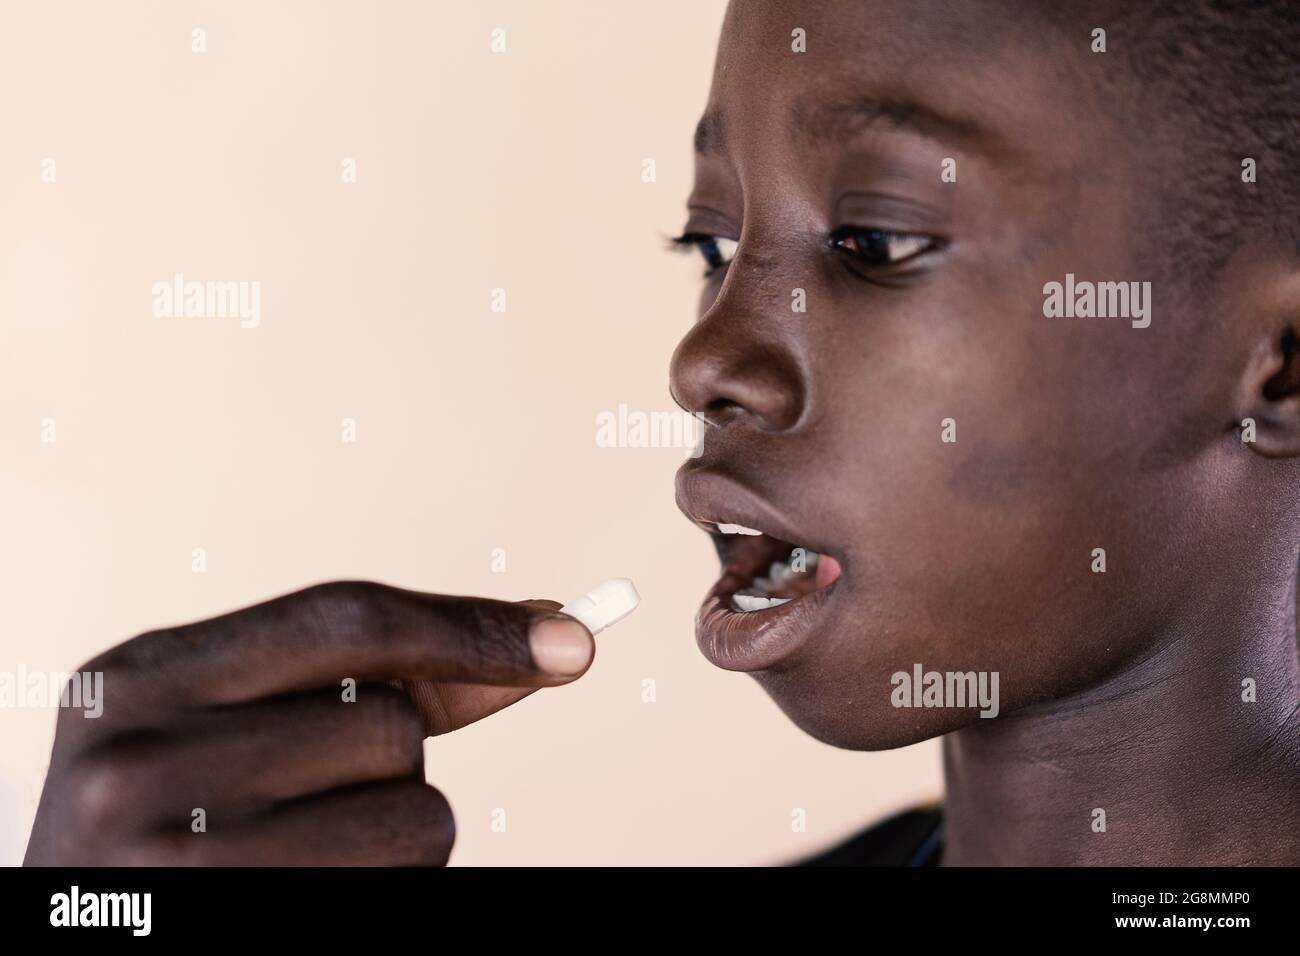 In this very close up shot, a young African boy given an oral medication. Concept image of medical drugs to prevent or cure a worldwide disease. Stock Photo